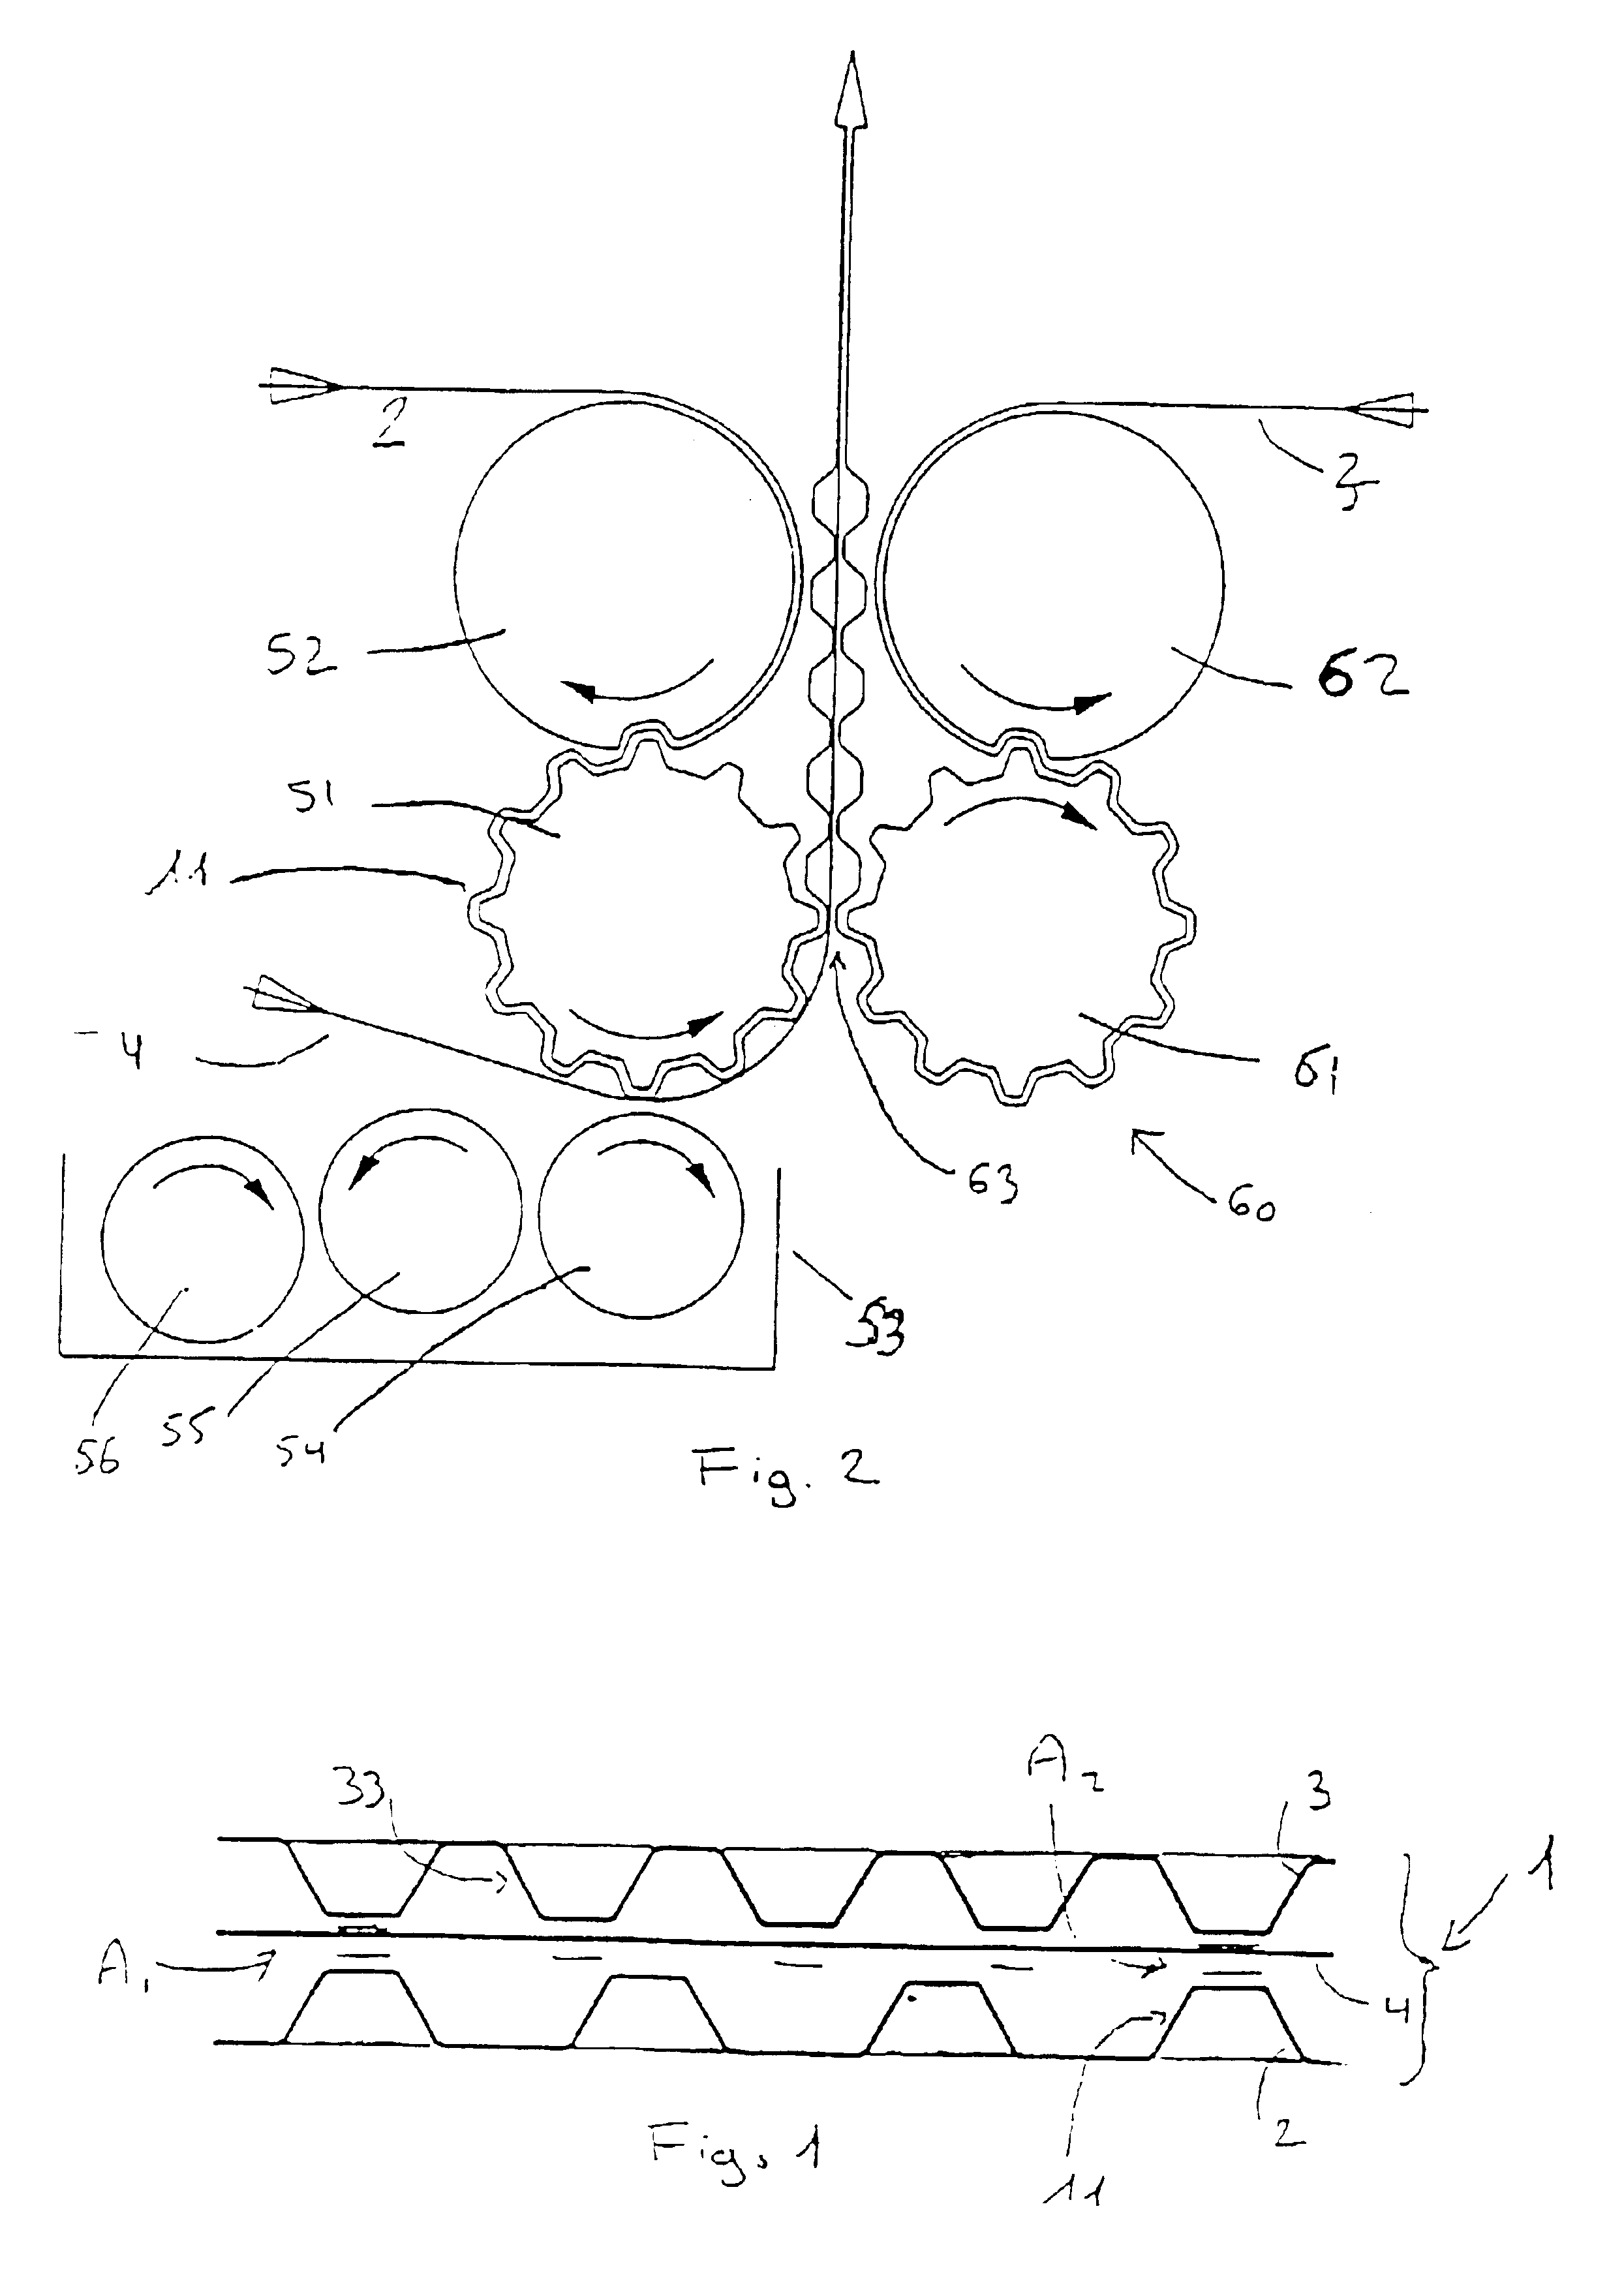 Three-ply absorbent paper product and method of making